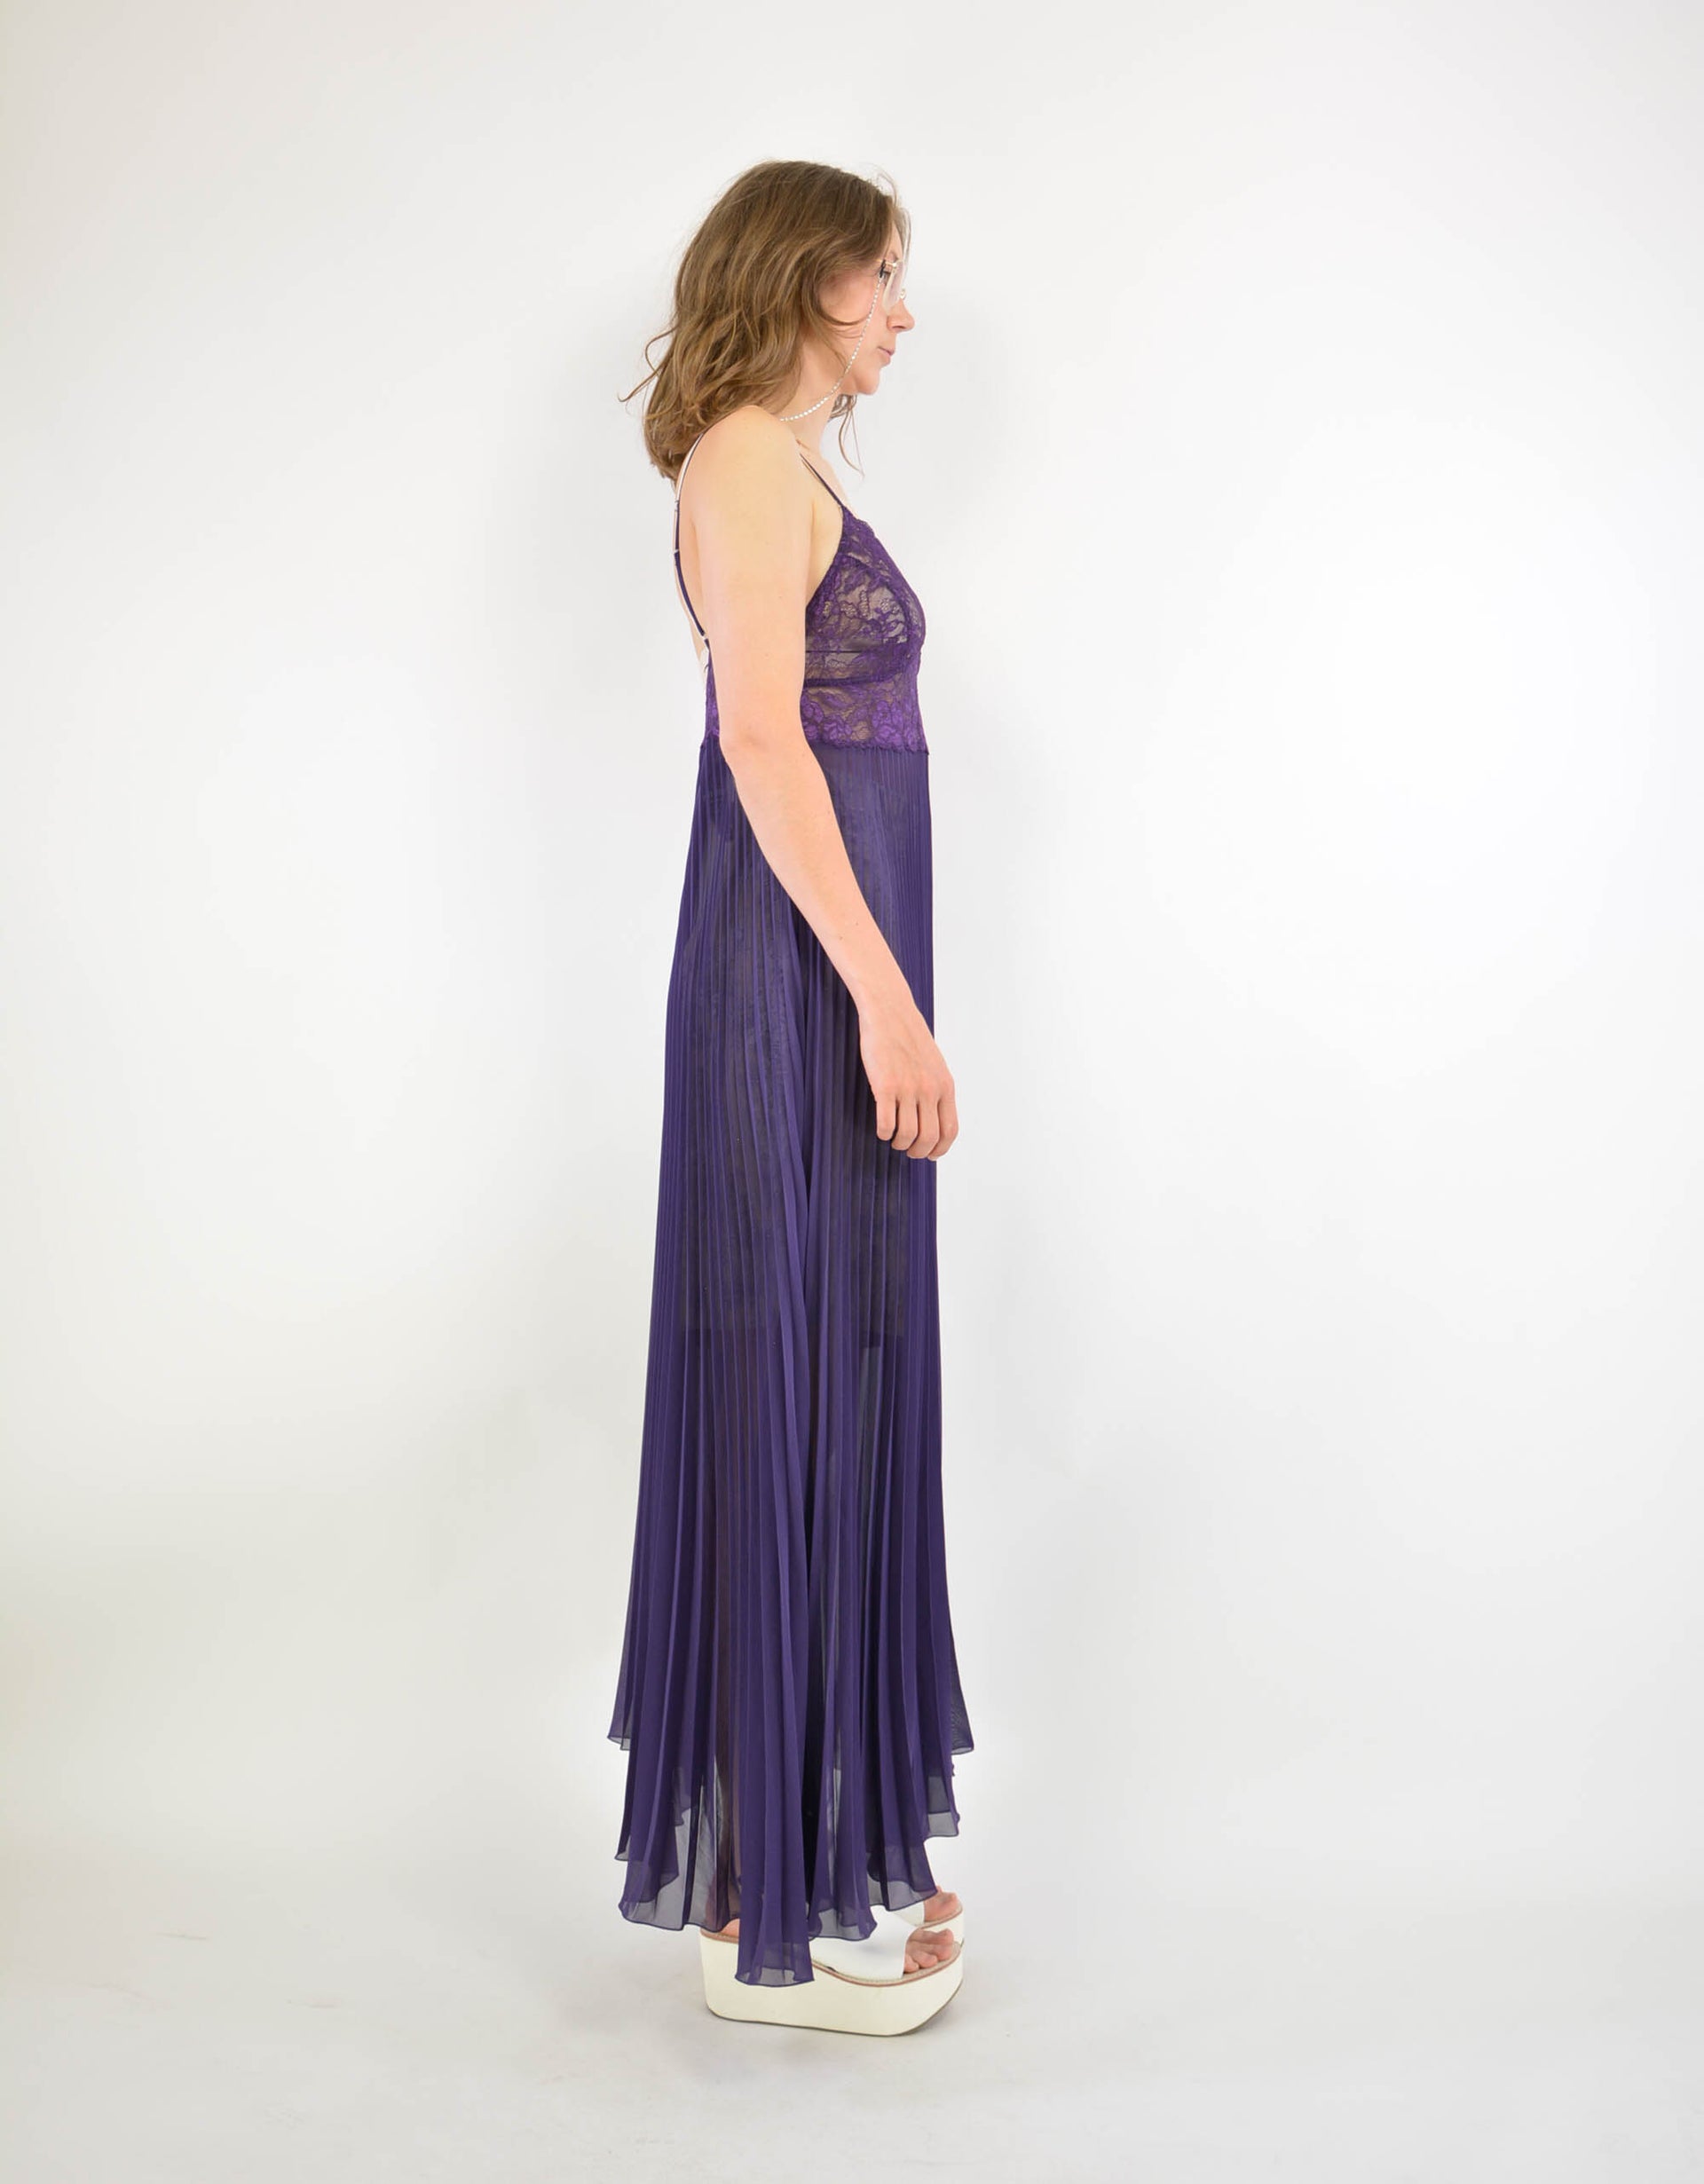 Negligee long - PICKNWEIGHT - VINTAGE KILO STORE